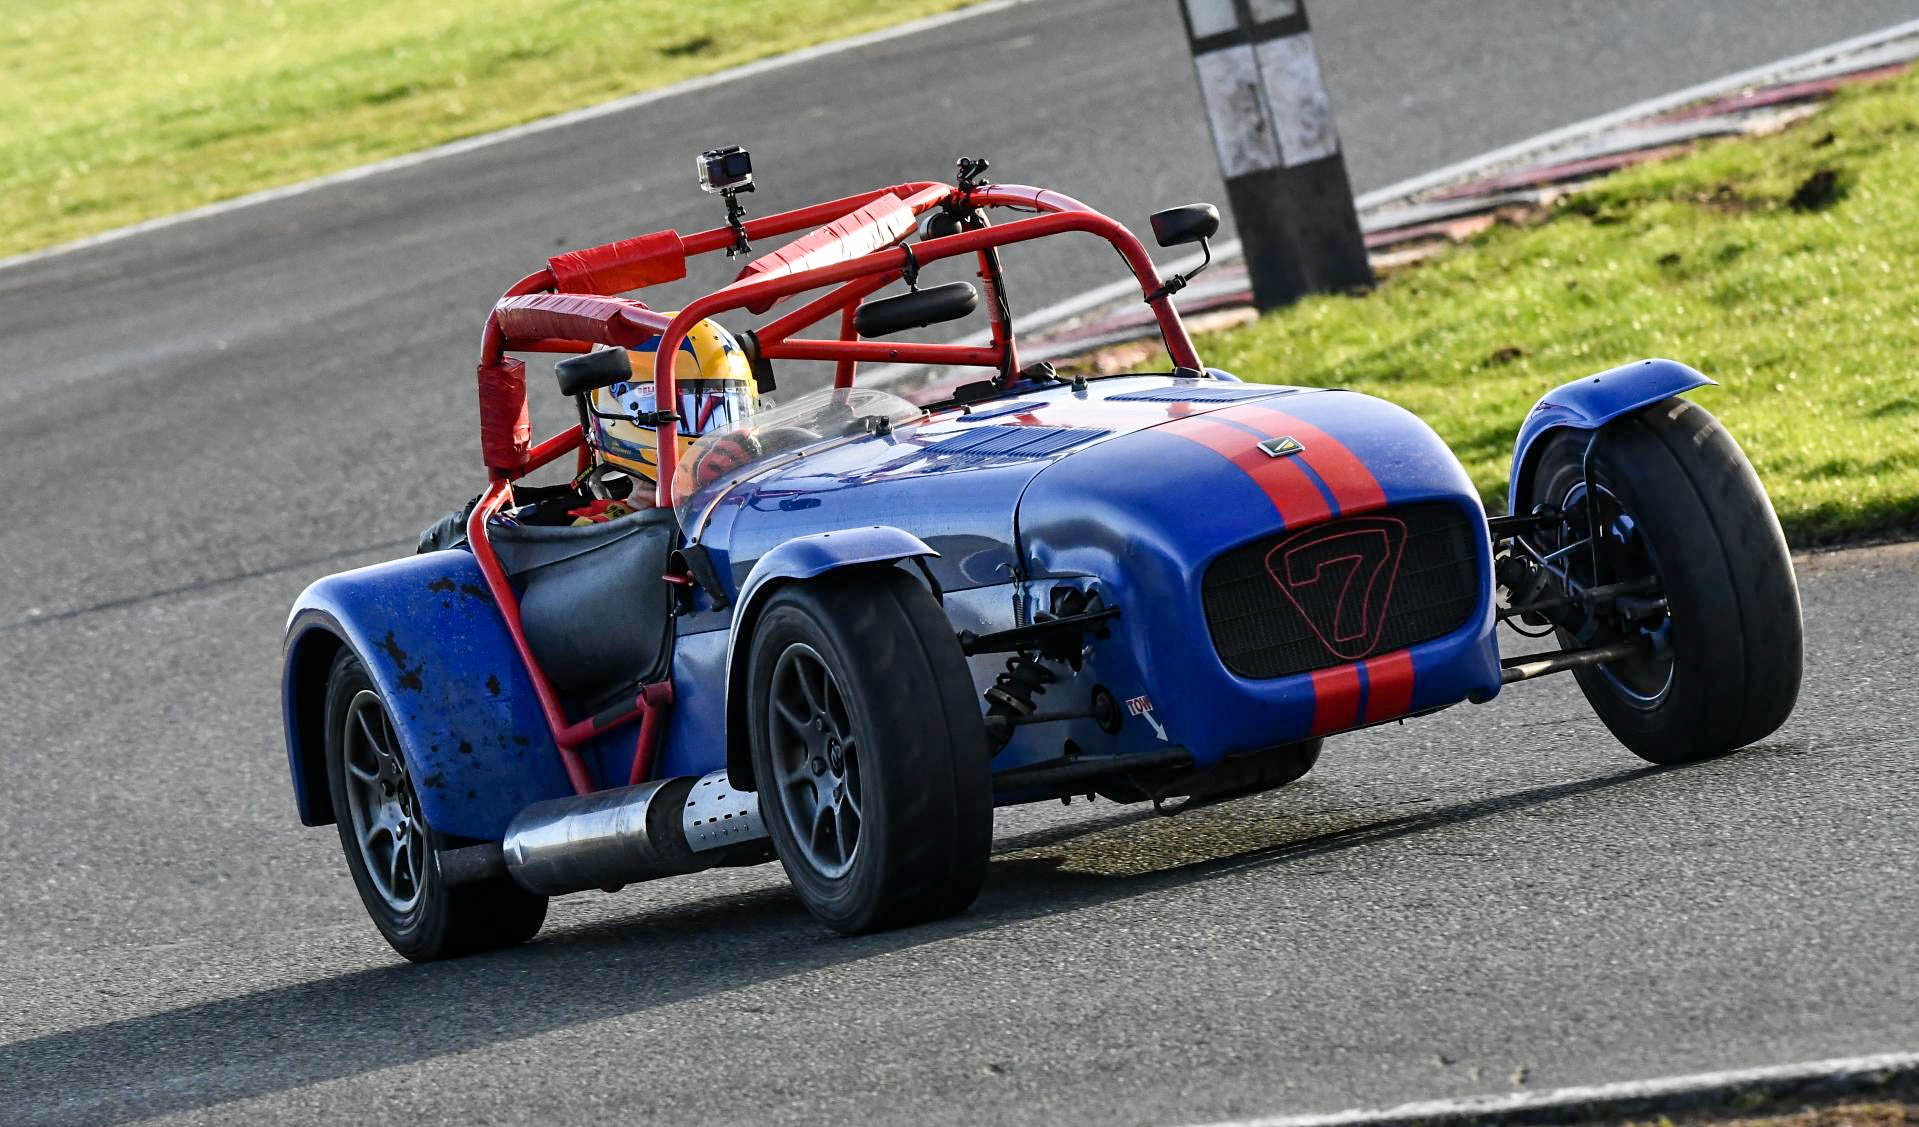 Caterham Race Driver Gears Up for EBC-Equipped Competitive Season